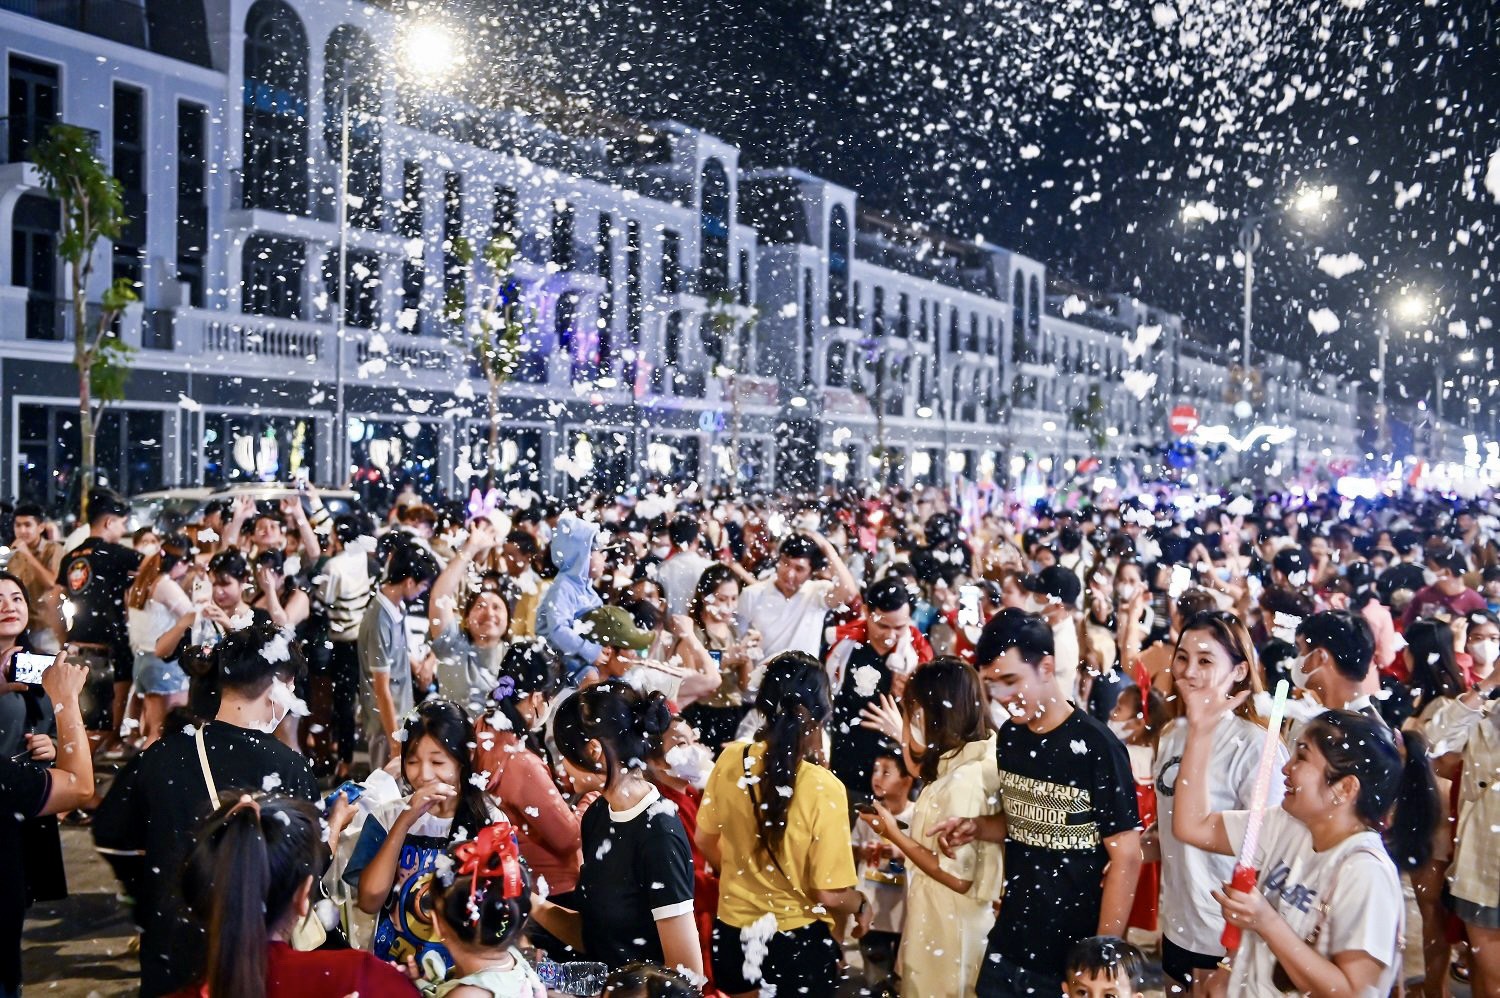 A crowd of people in a street with confetti  Description automatically generated